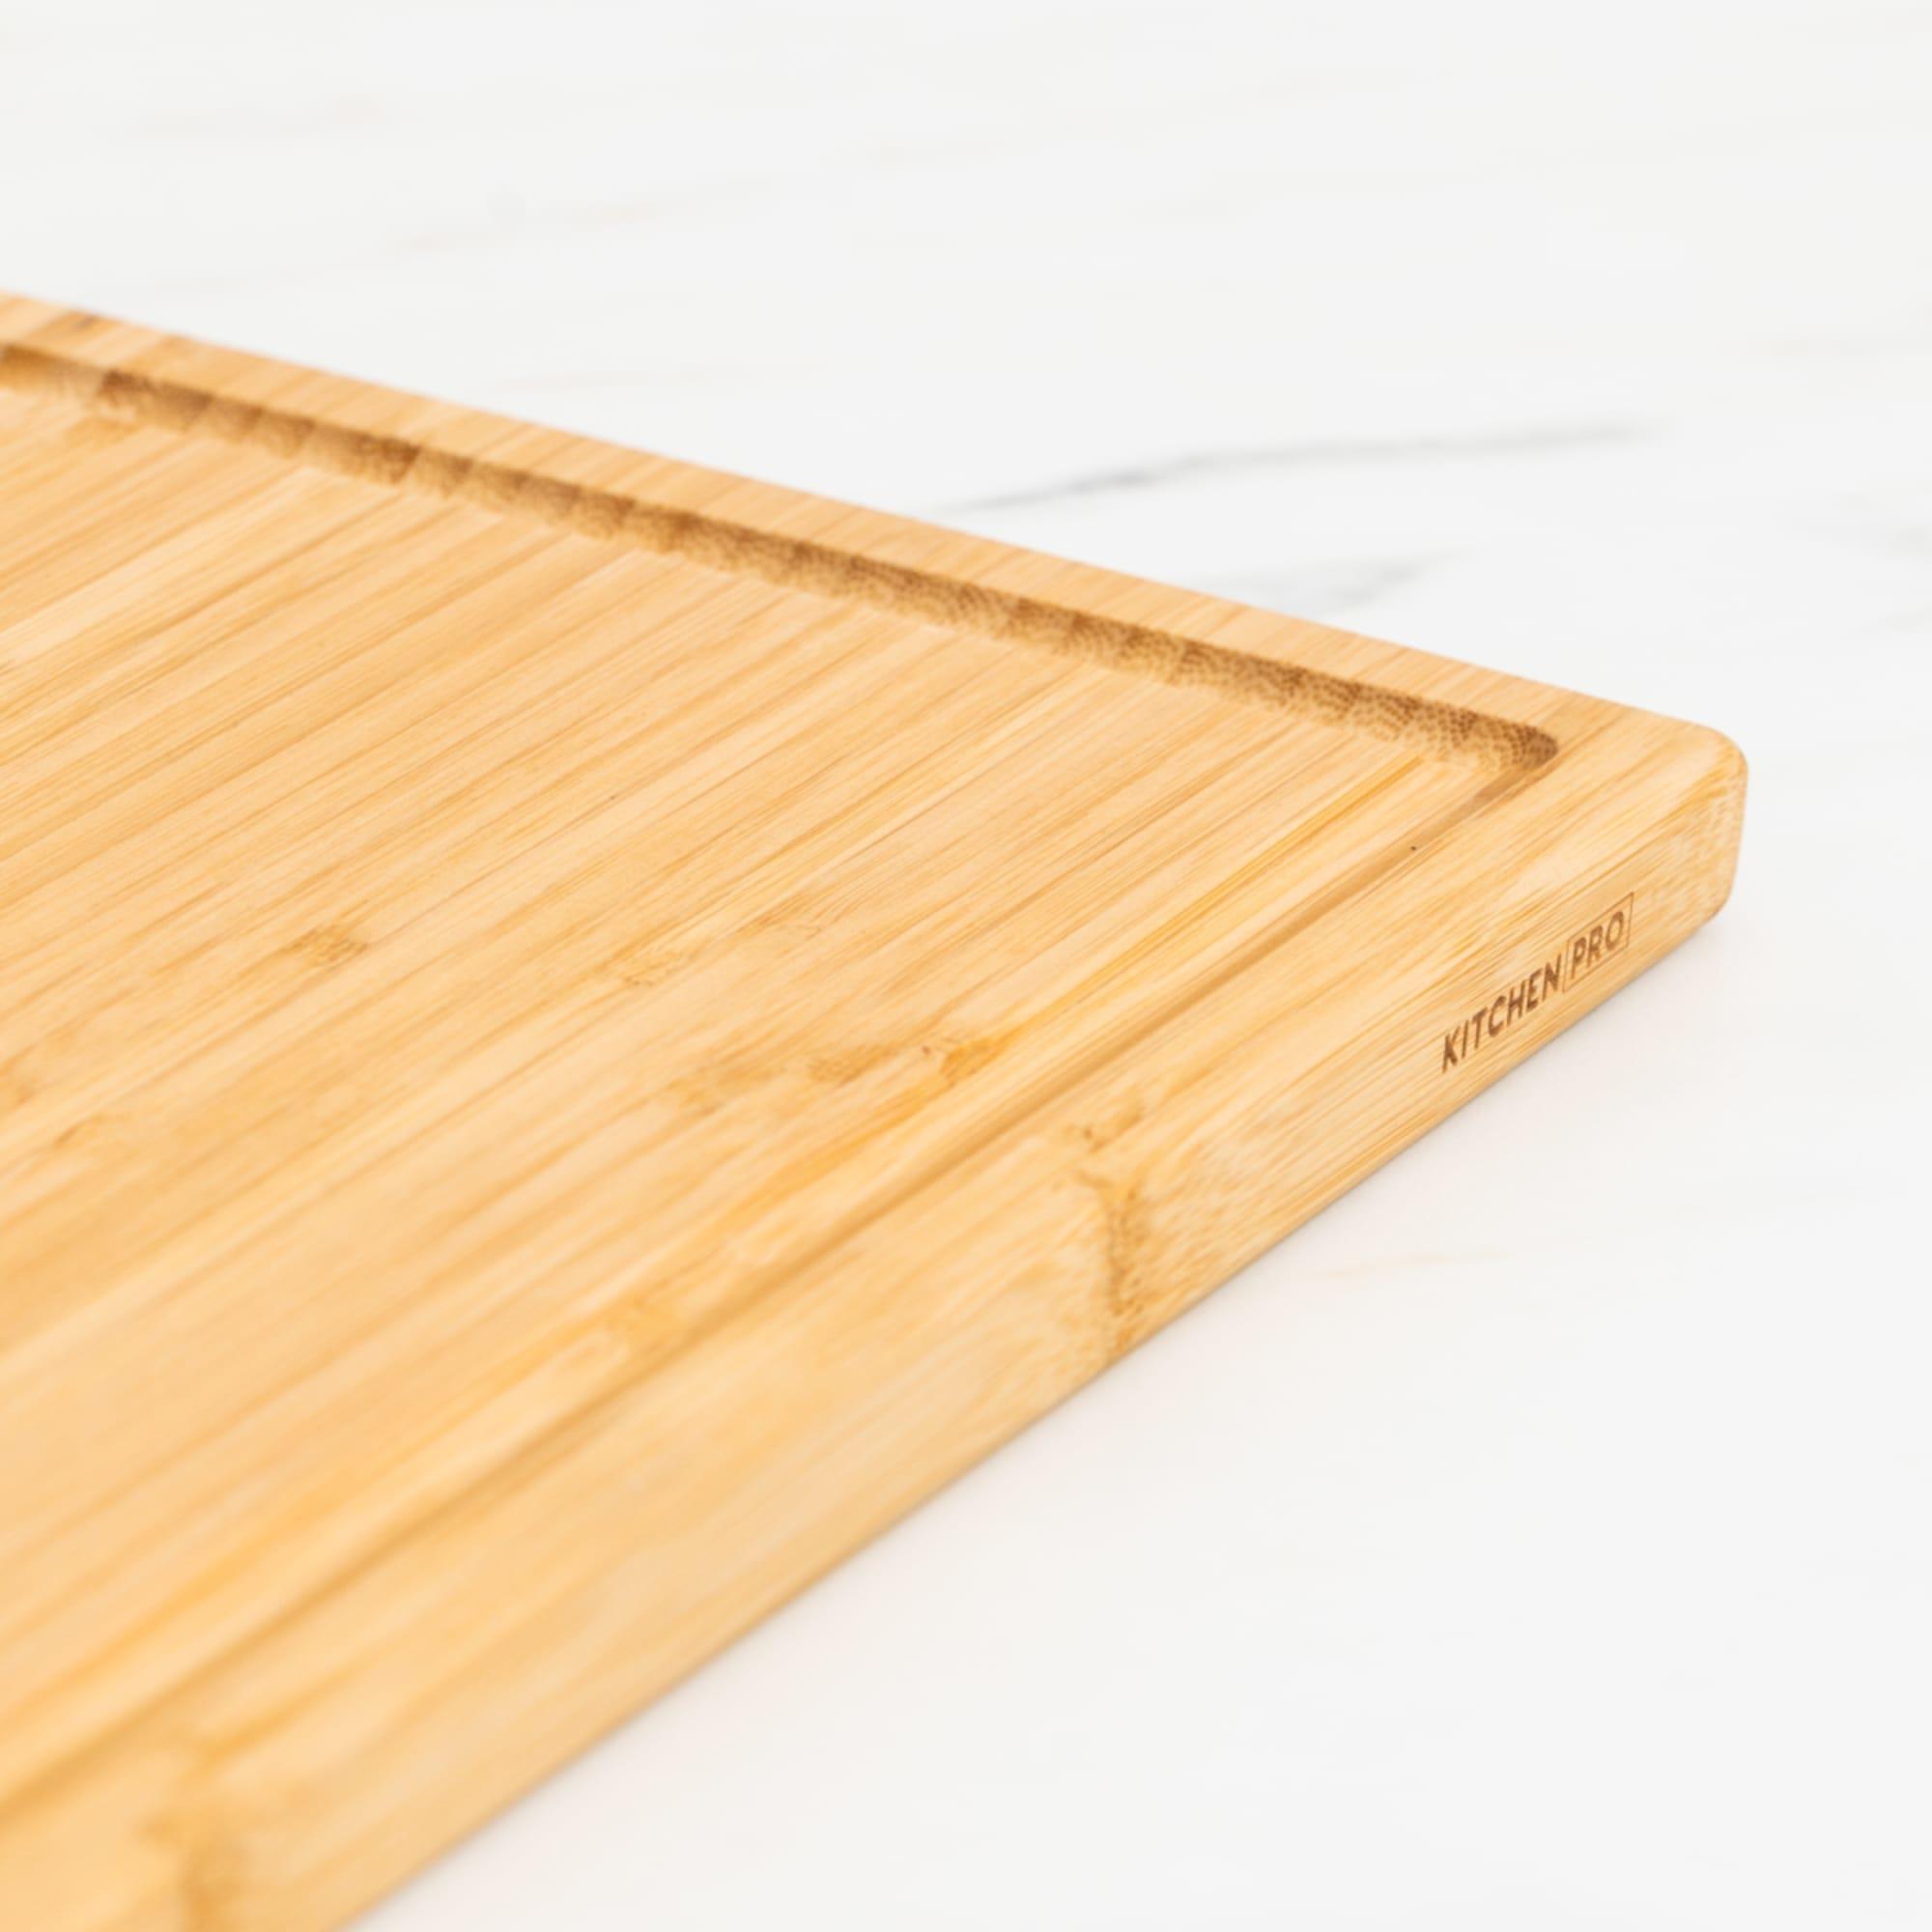 Kitchen Pro Eco Bamboo Carving Board 49x35cm Image 3